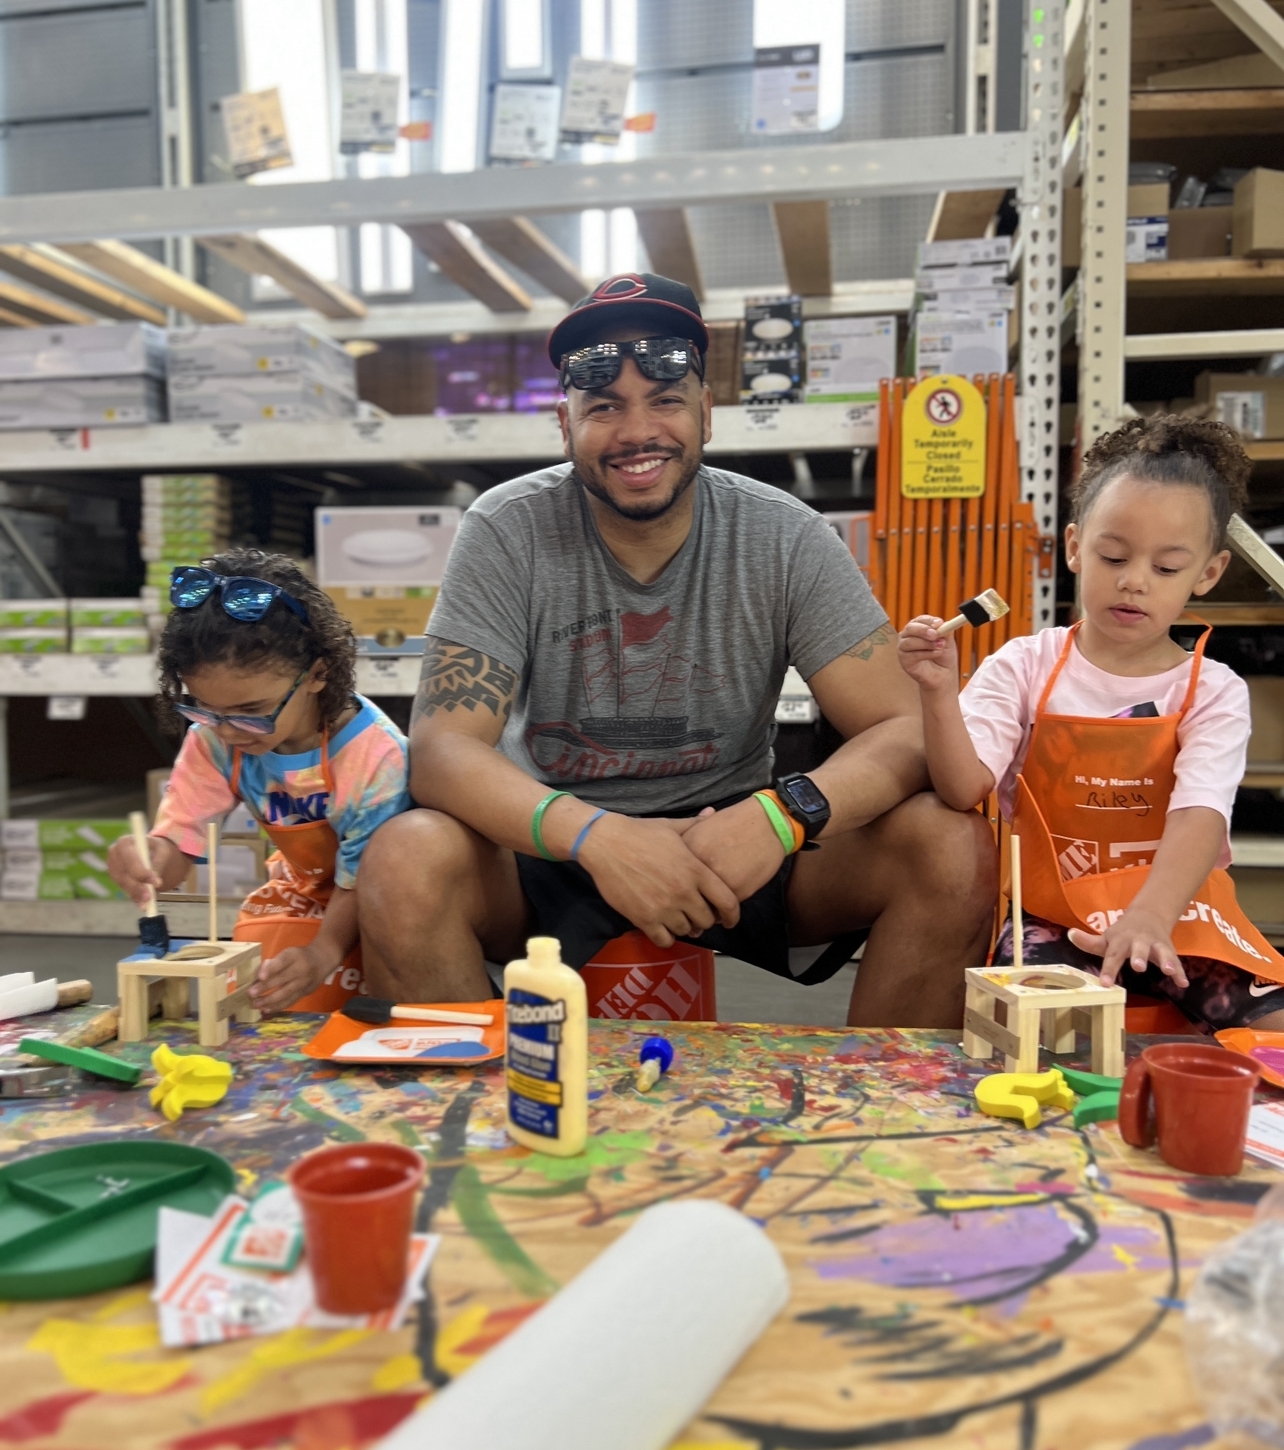 DIY Fun for Kids: Free In-Store Workshops at Home Depot